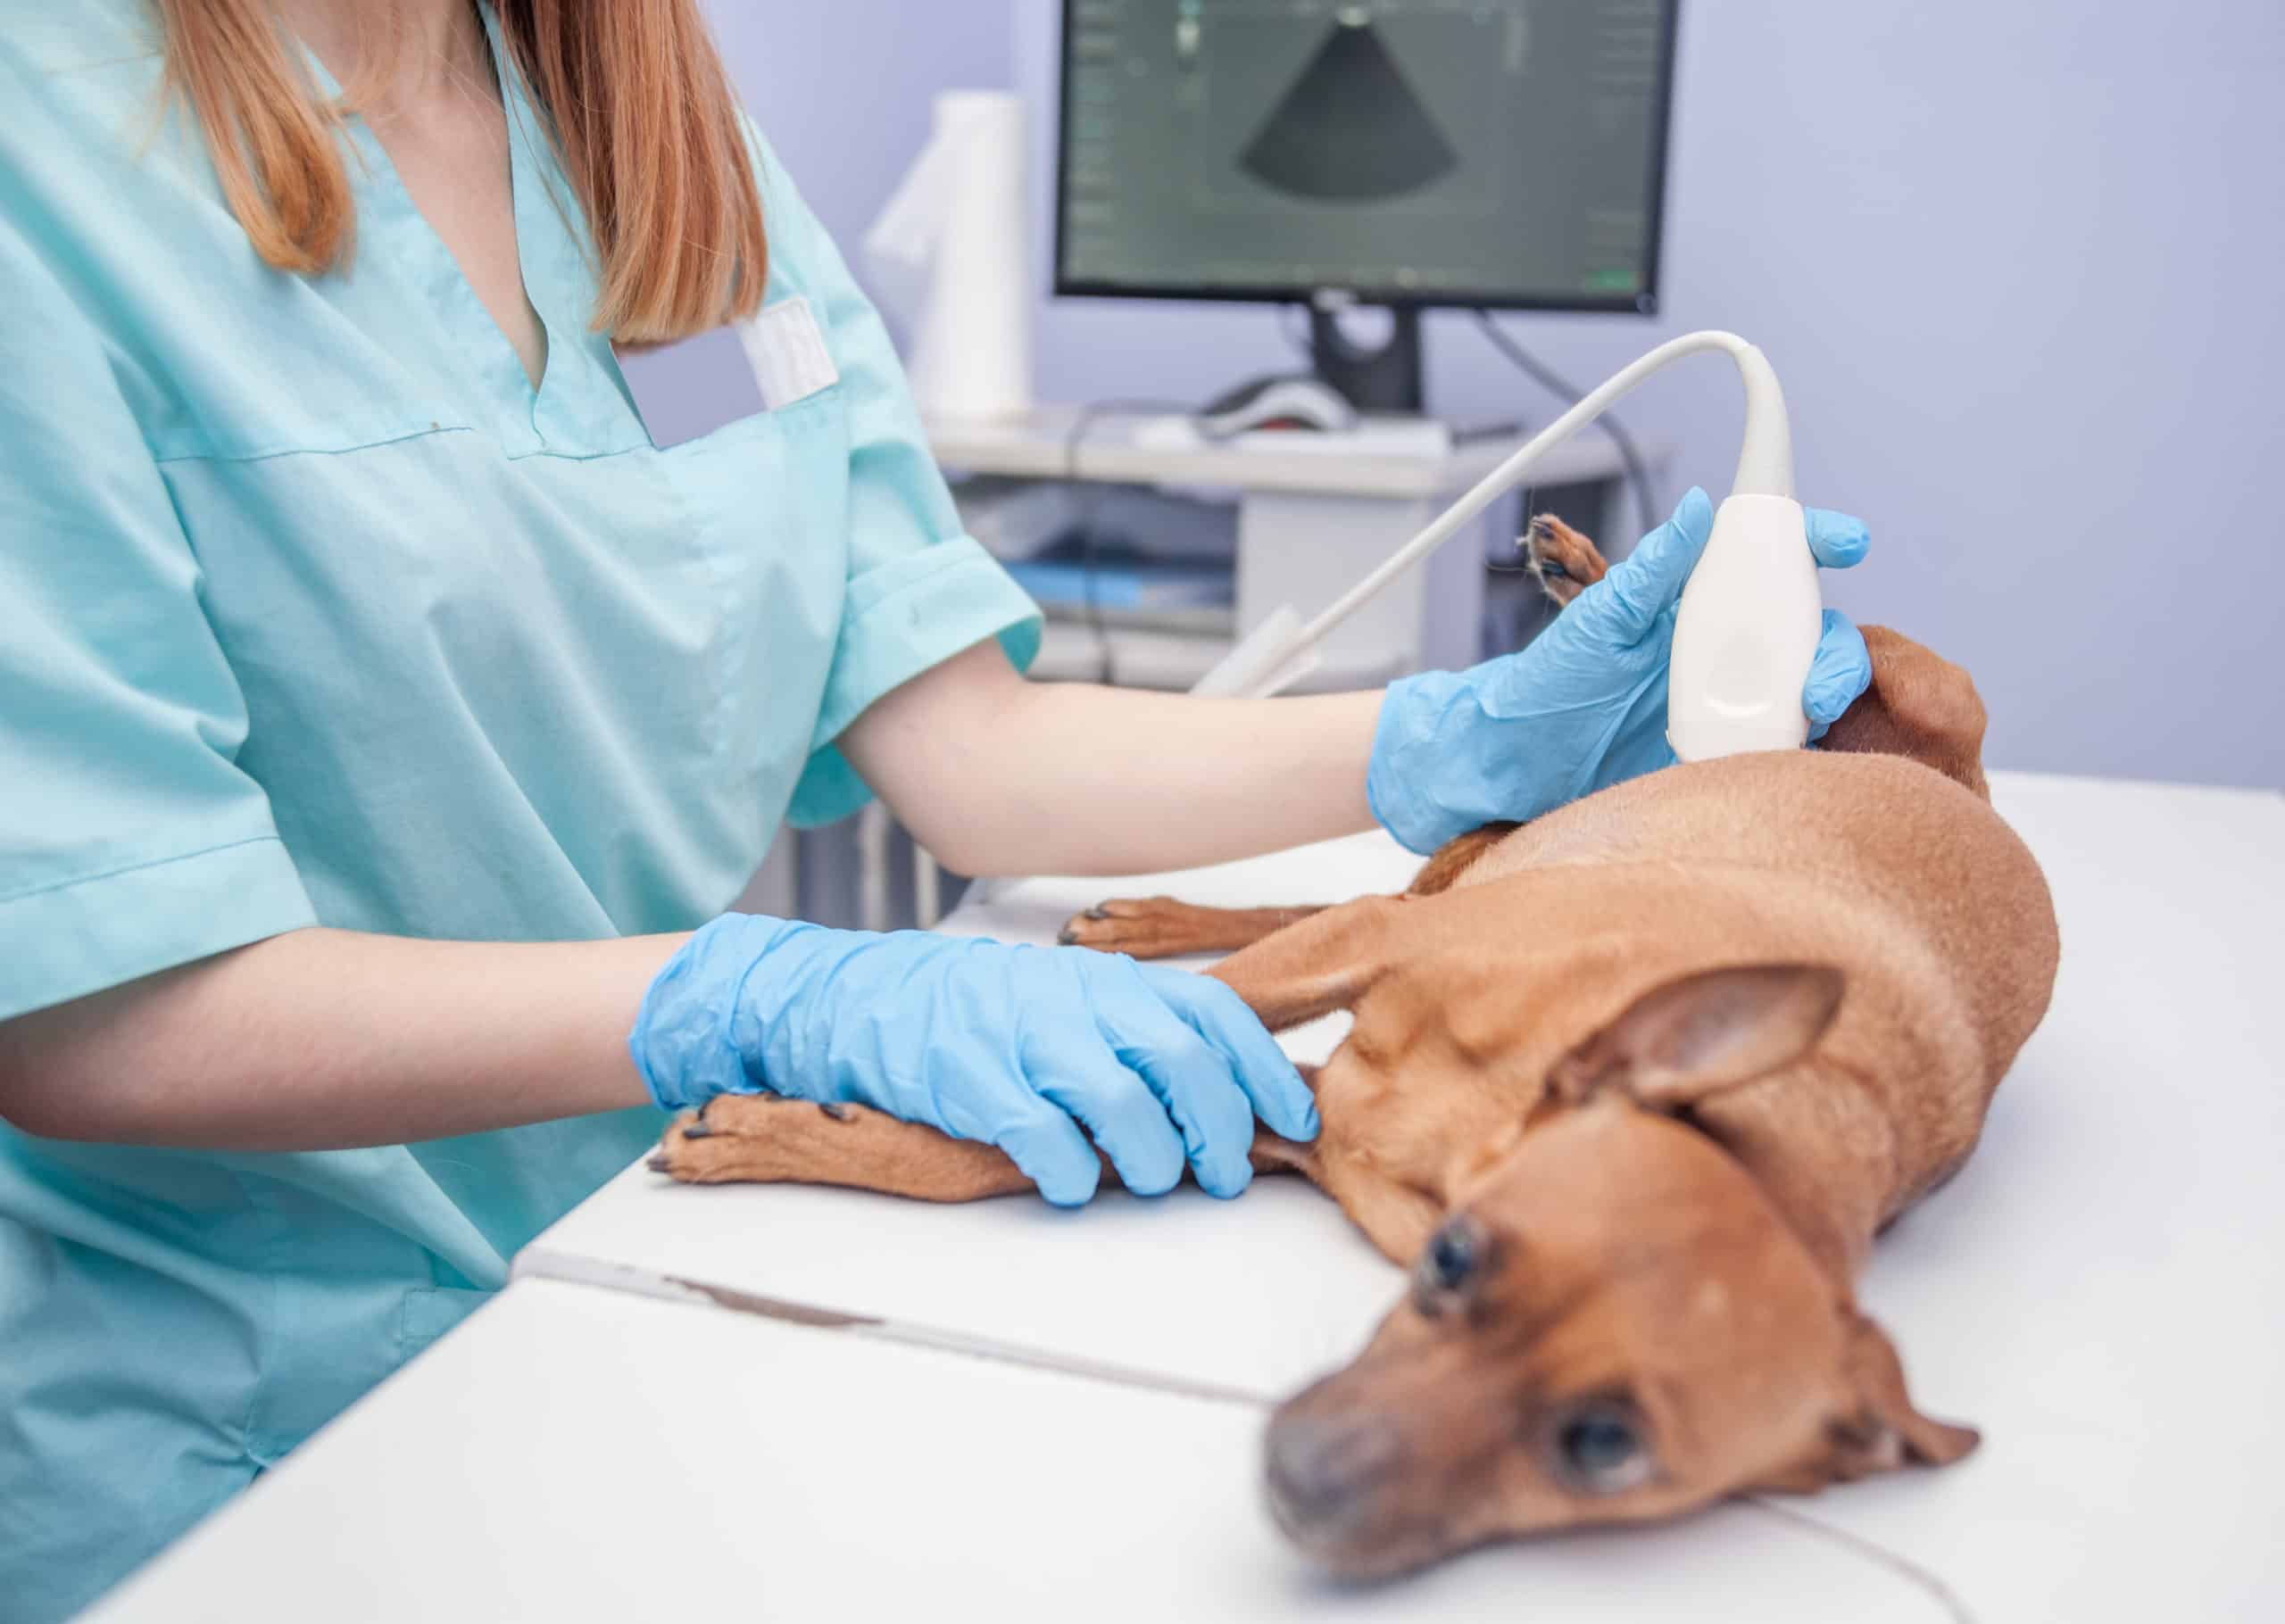 Sick dog gets an ultrasound at the vet's office.